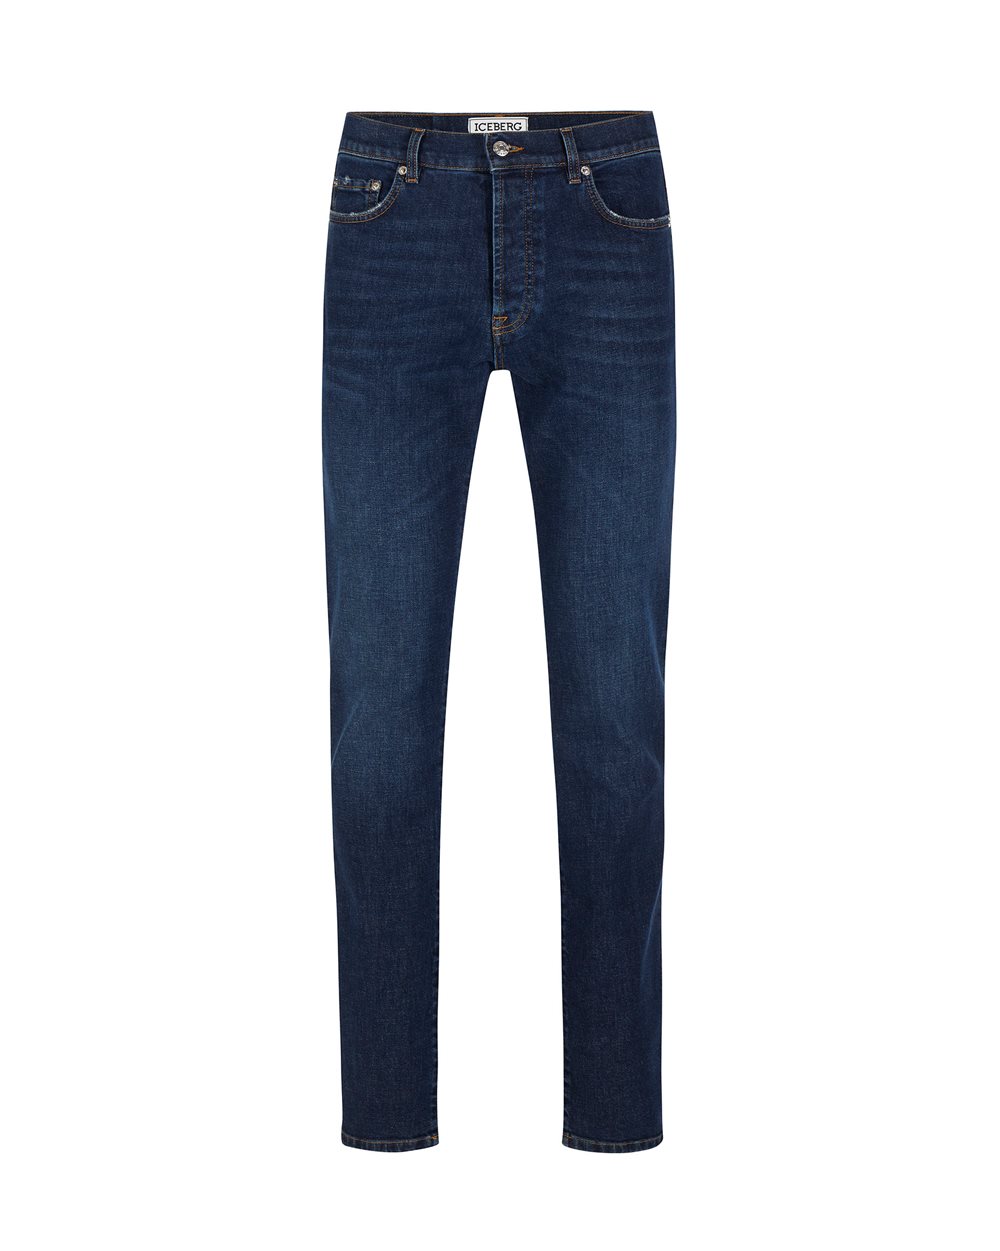 Classic 5-pocket blue jeans - TROUSERS AND JEANS | Iceberg - Official Website